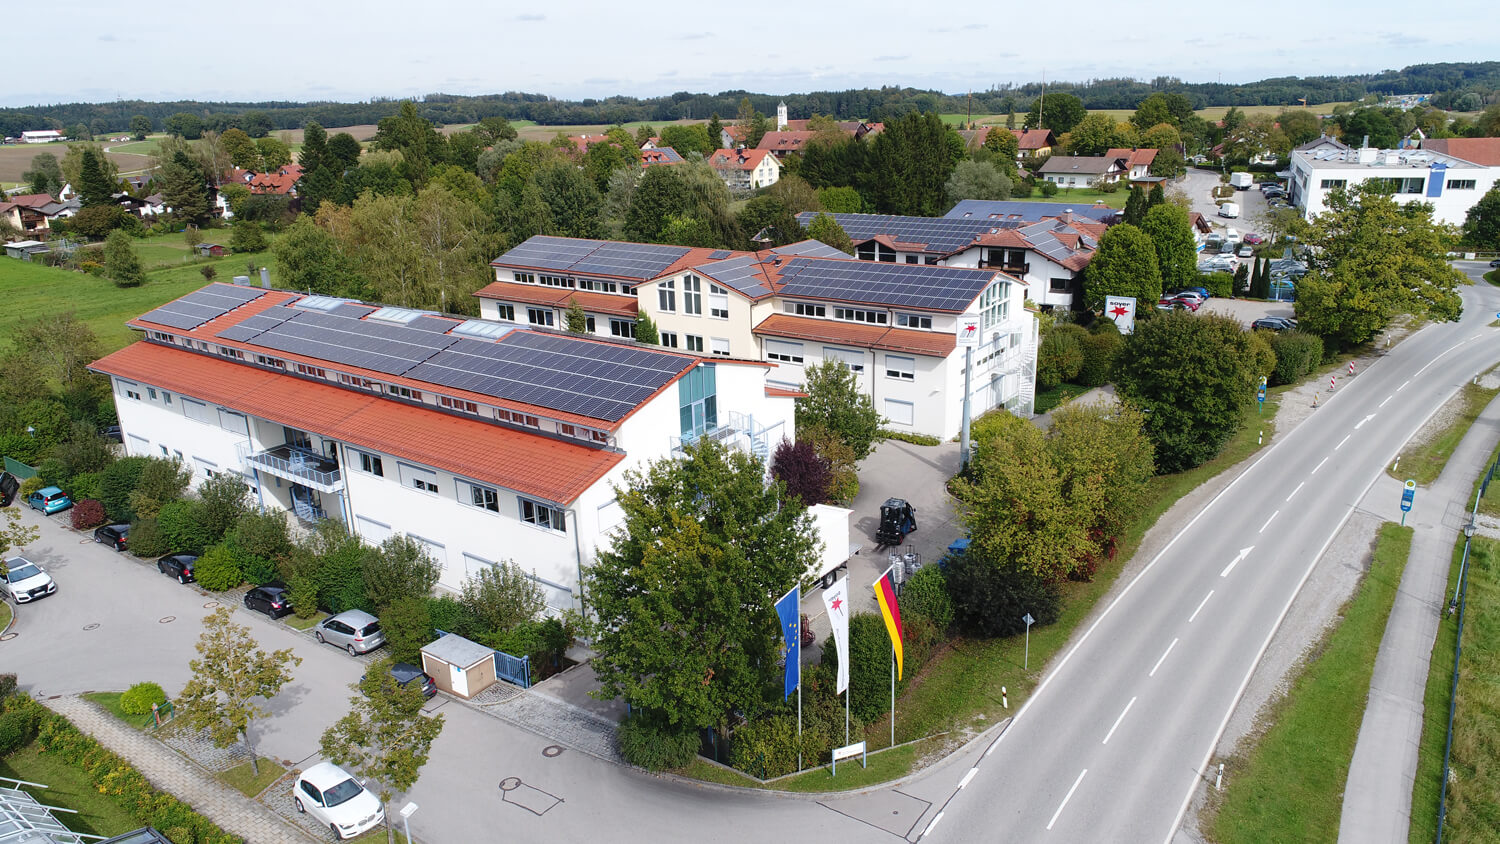 Photovoltaic system for company buildings